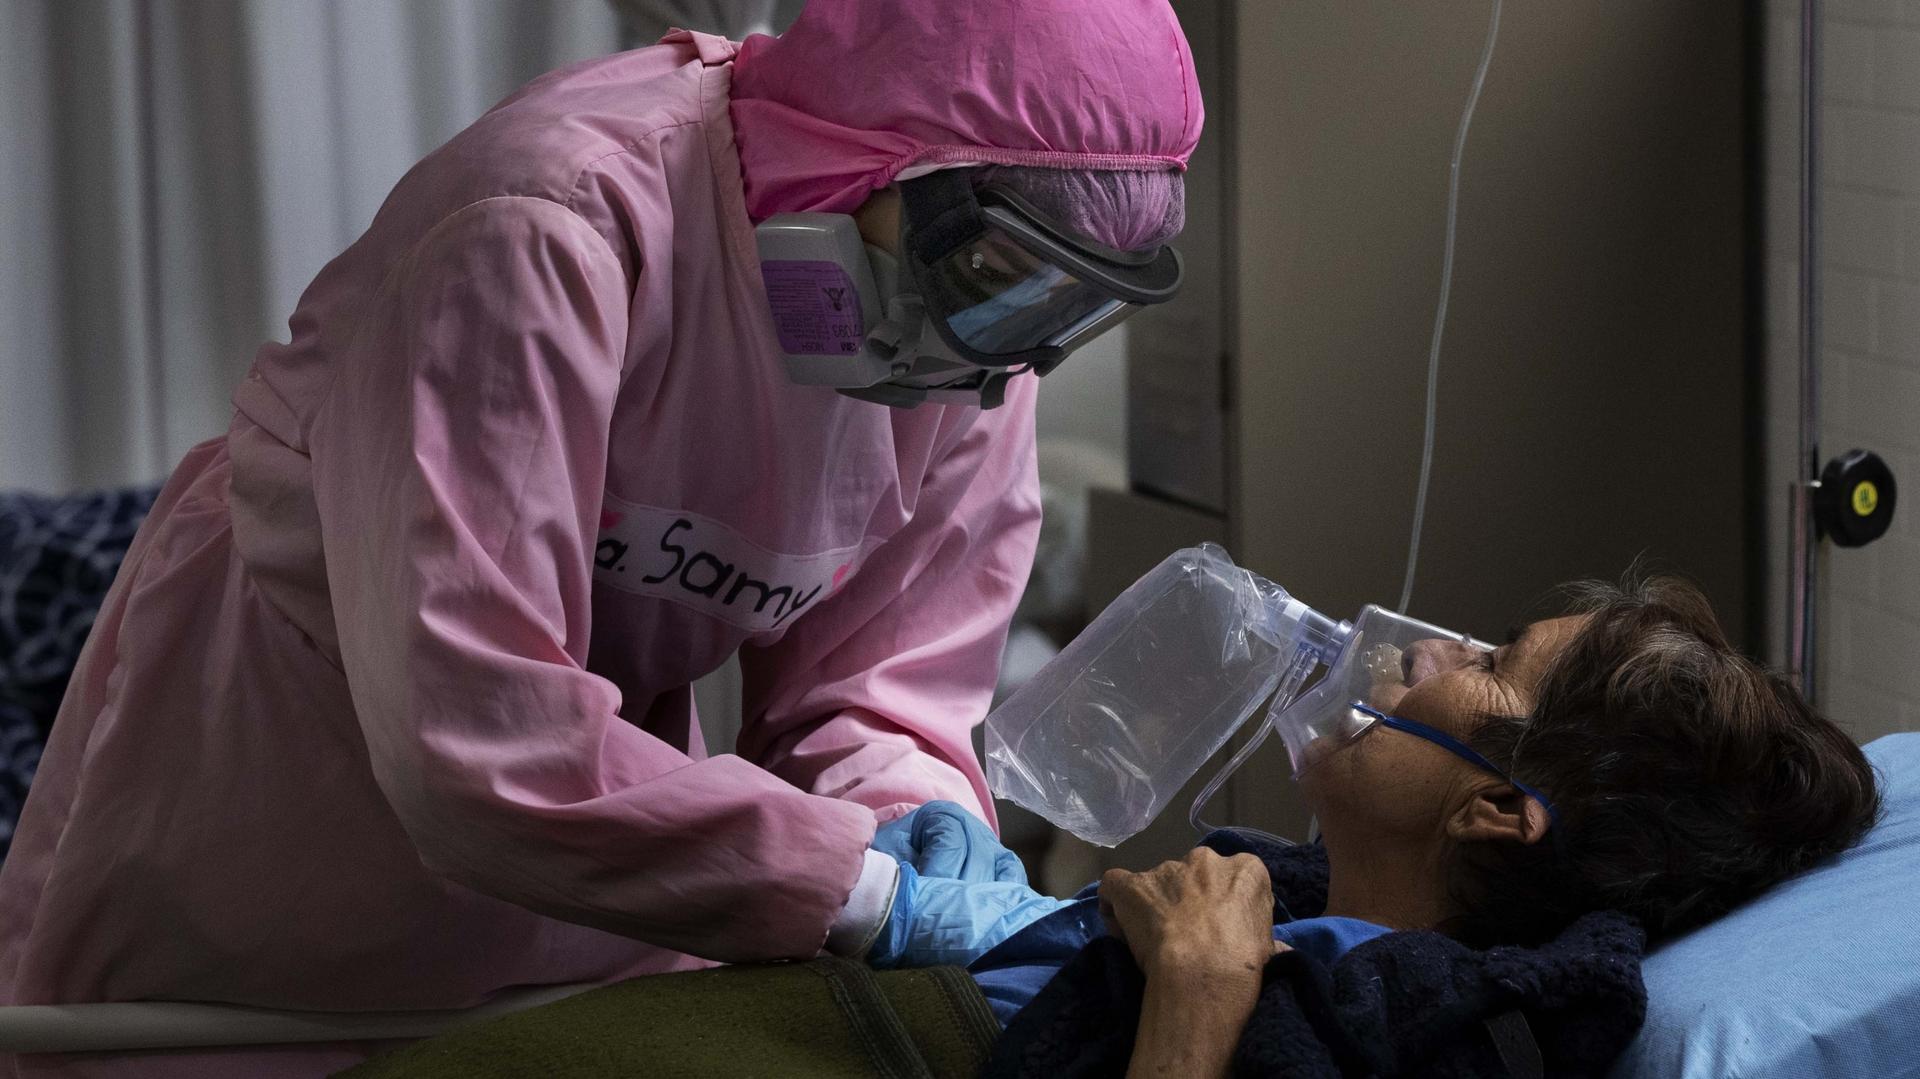 Dressed in protective gear to curb the spread of the new coronavirus, a medical worker massages a patient, at a military hospital set up to take care of COVID-19 patients.